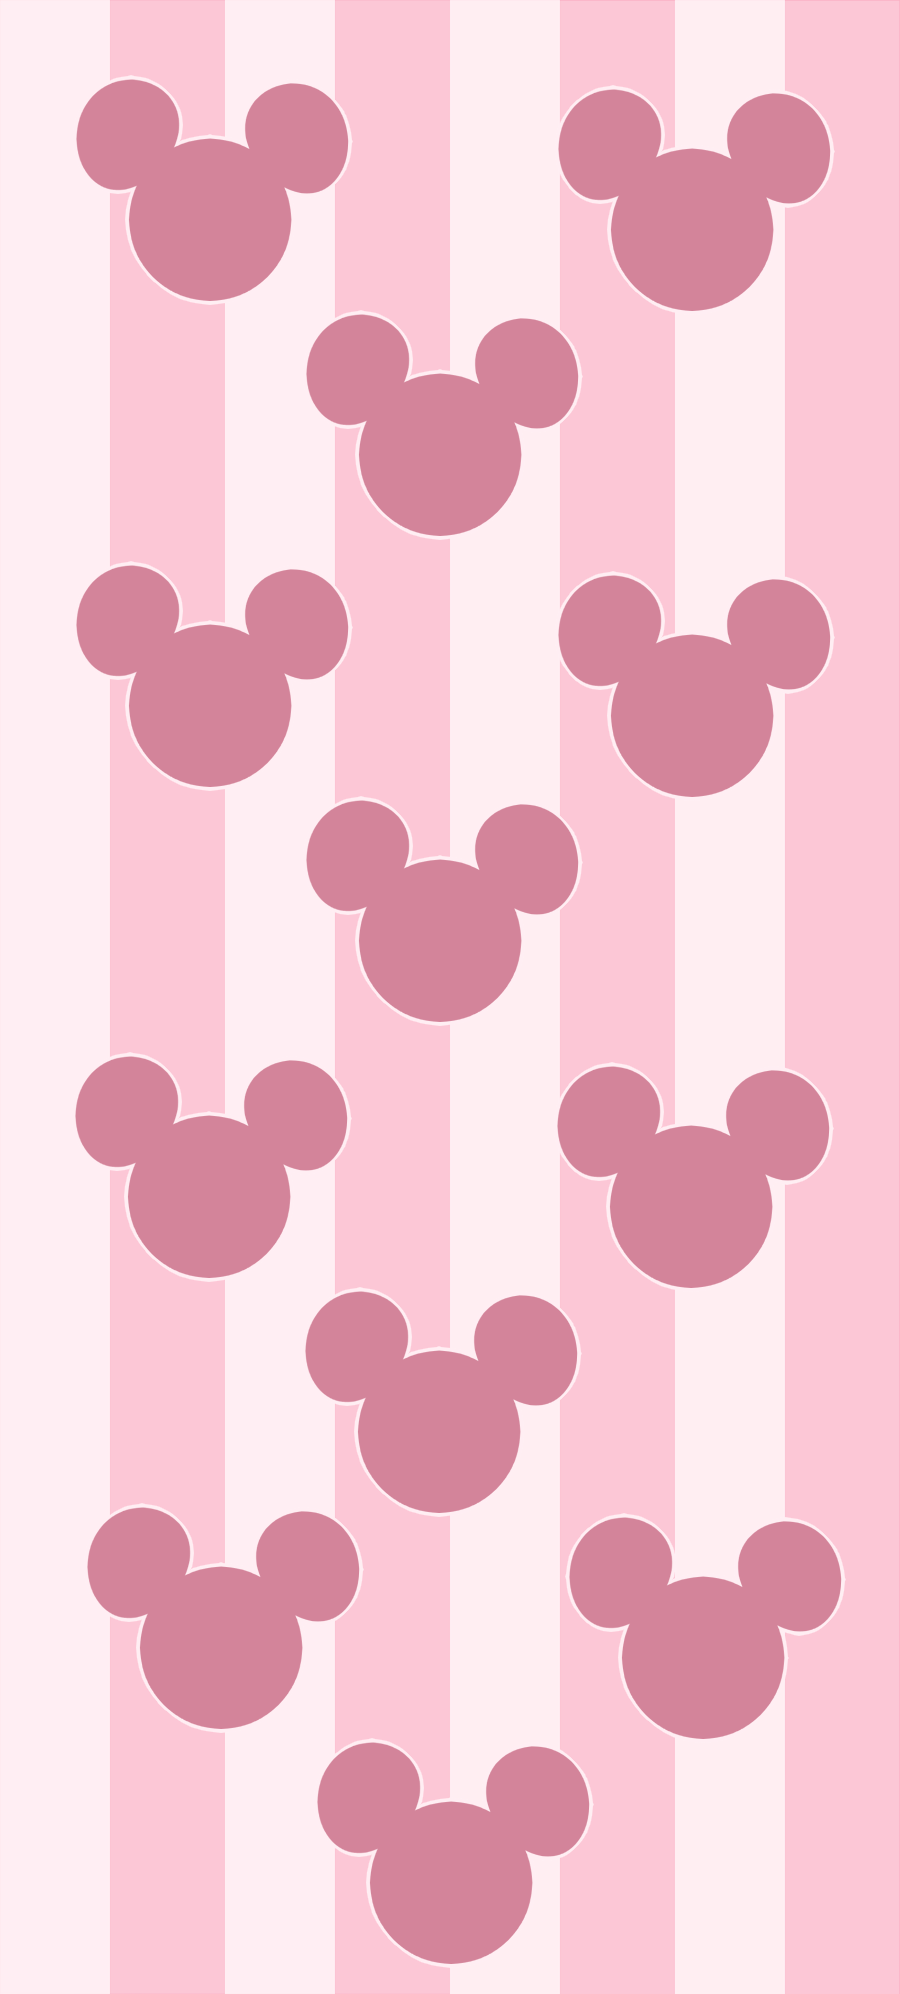 Mickey Mouse Backgrounds